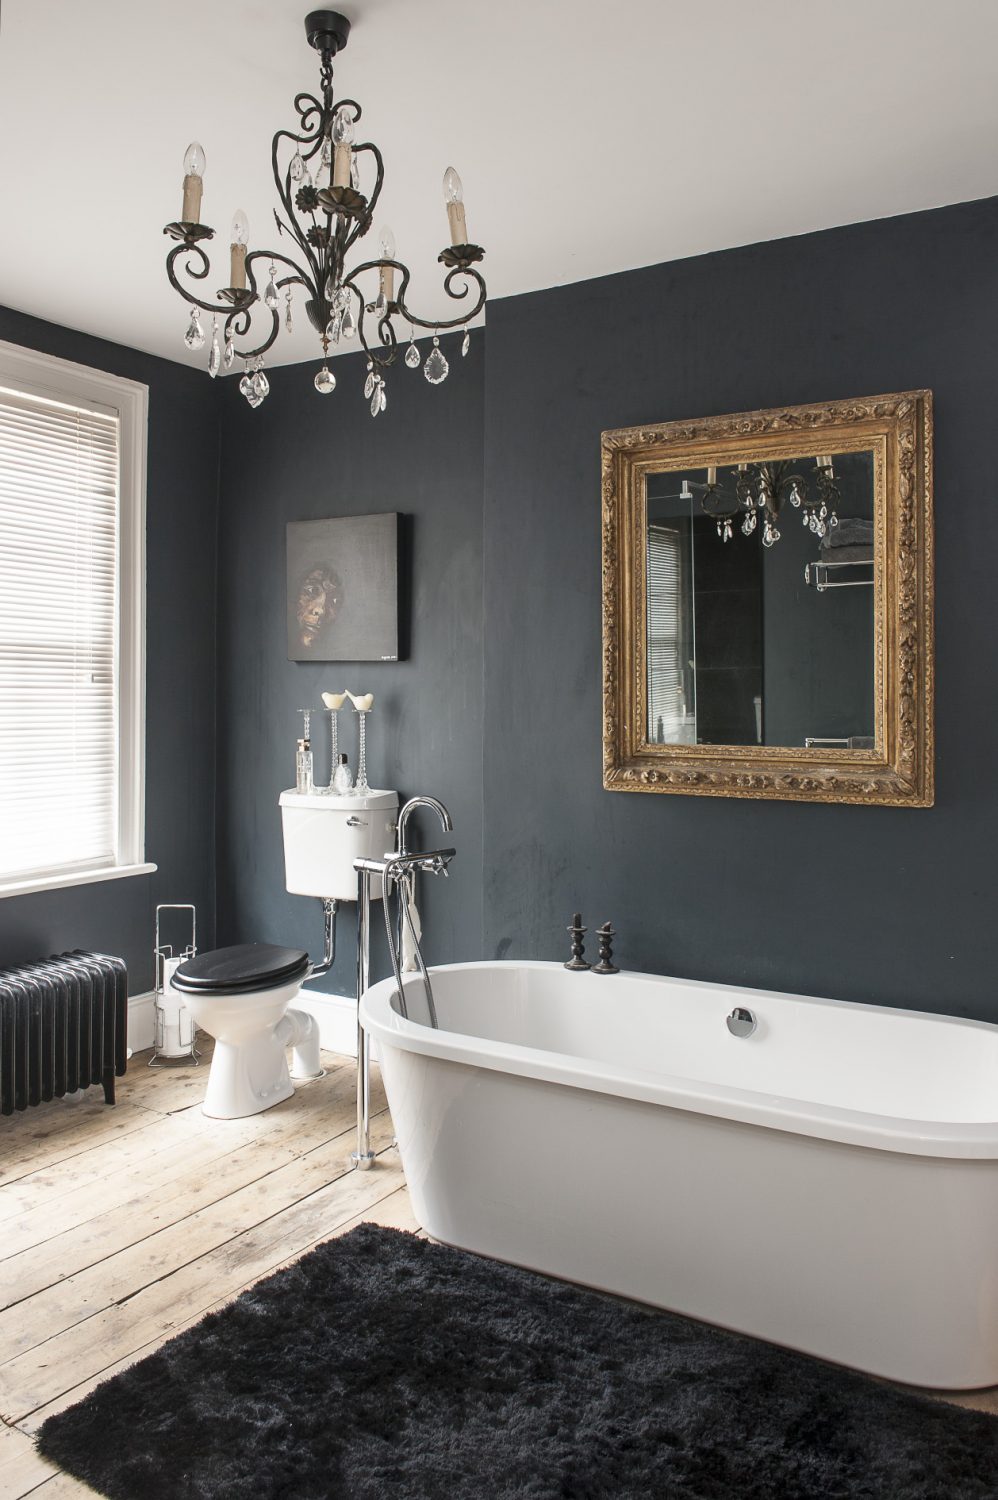 The juxtaposition of light and dark in this house is emphasised in the bathrooms. There are two good-sized rooms – one white and one black – both have a striking painting in a similar position; in the white bathroom there’s a picture of a skull by Ben Eine and in the black, a raw and intense painting by Alice Maylam titled ‘Out of the Dark’ which features a face protruding into the light and provided the inspiration for Rob’s bold colour choice...